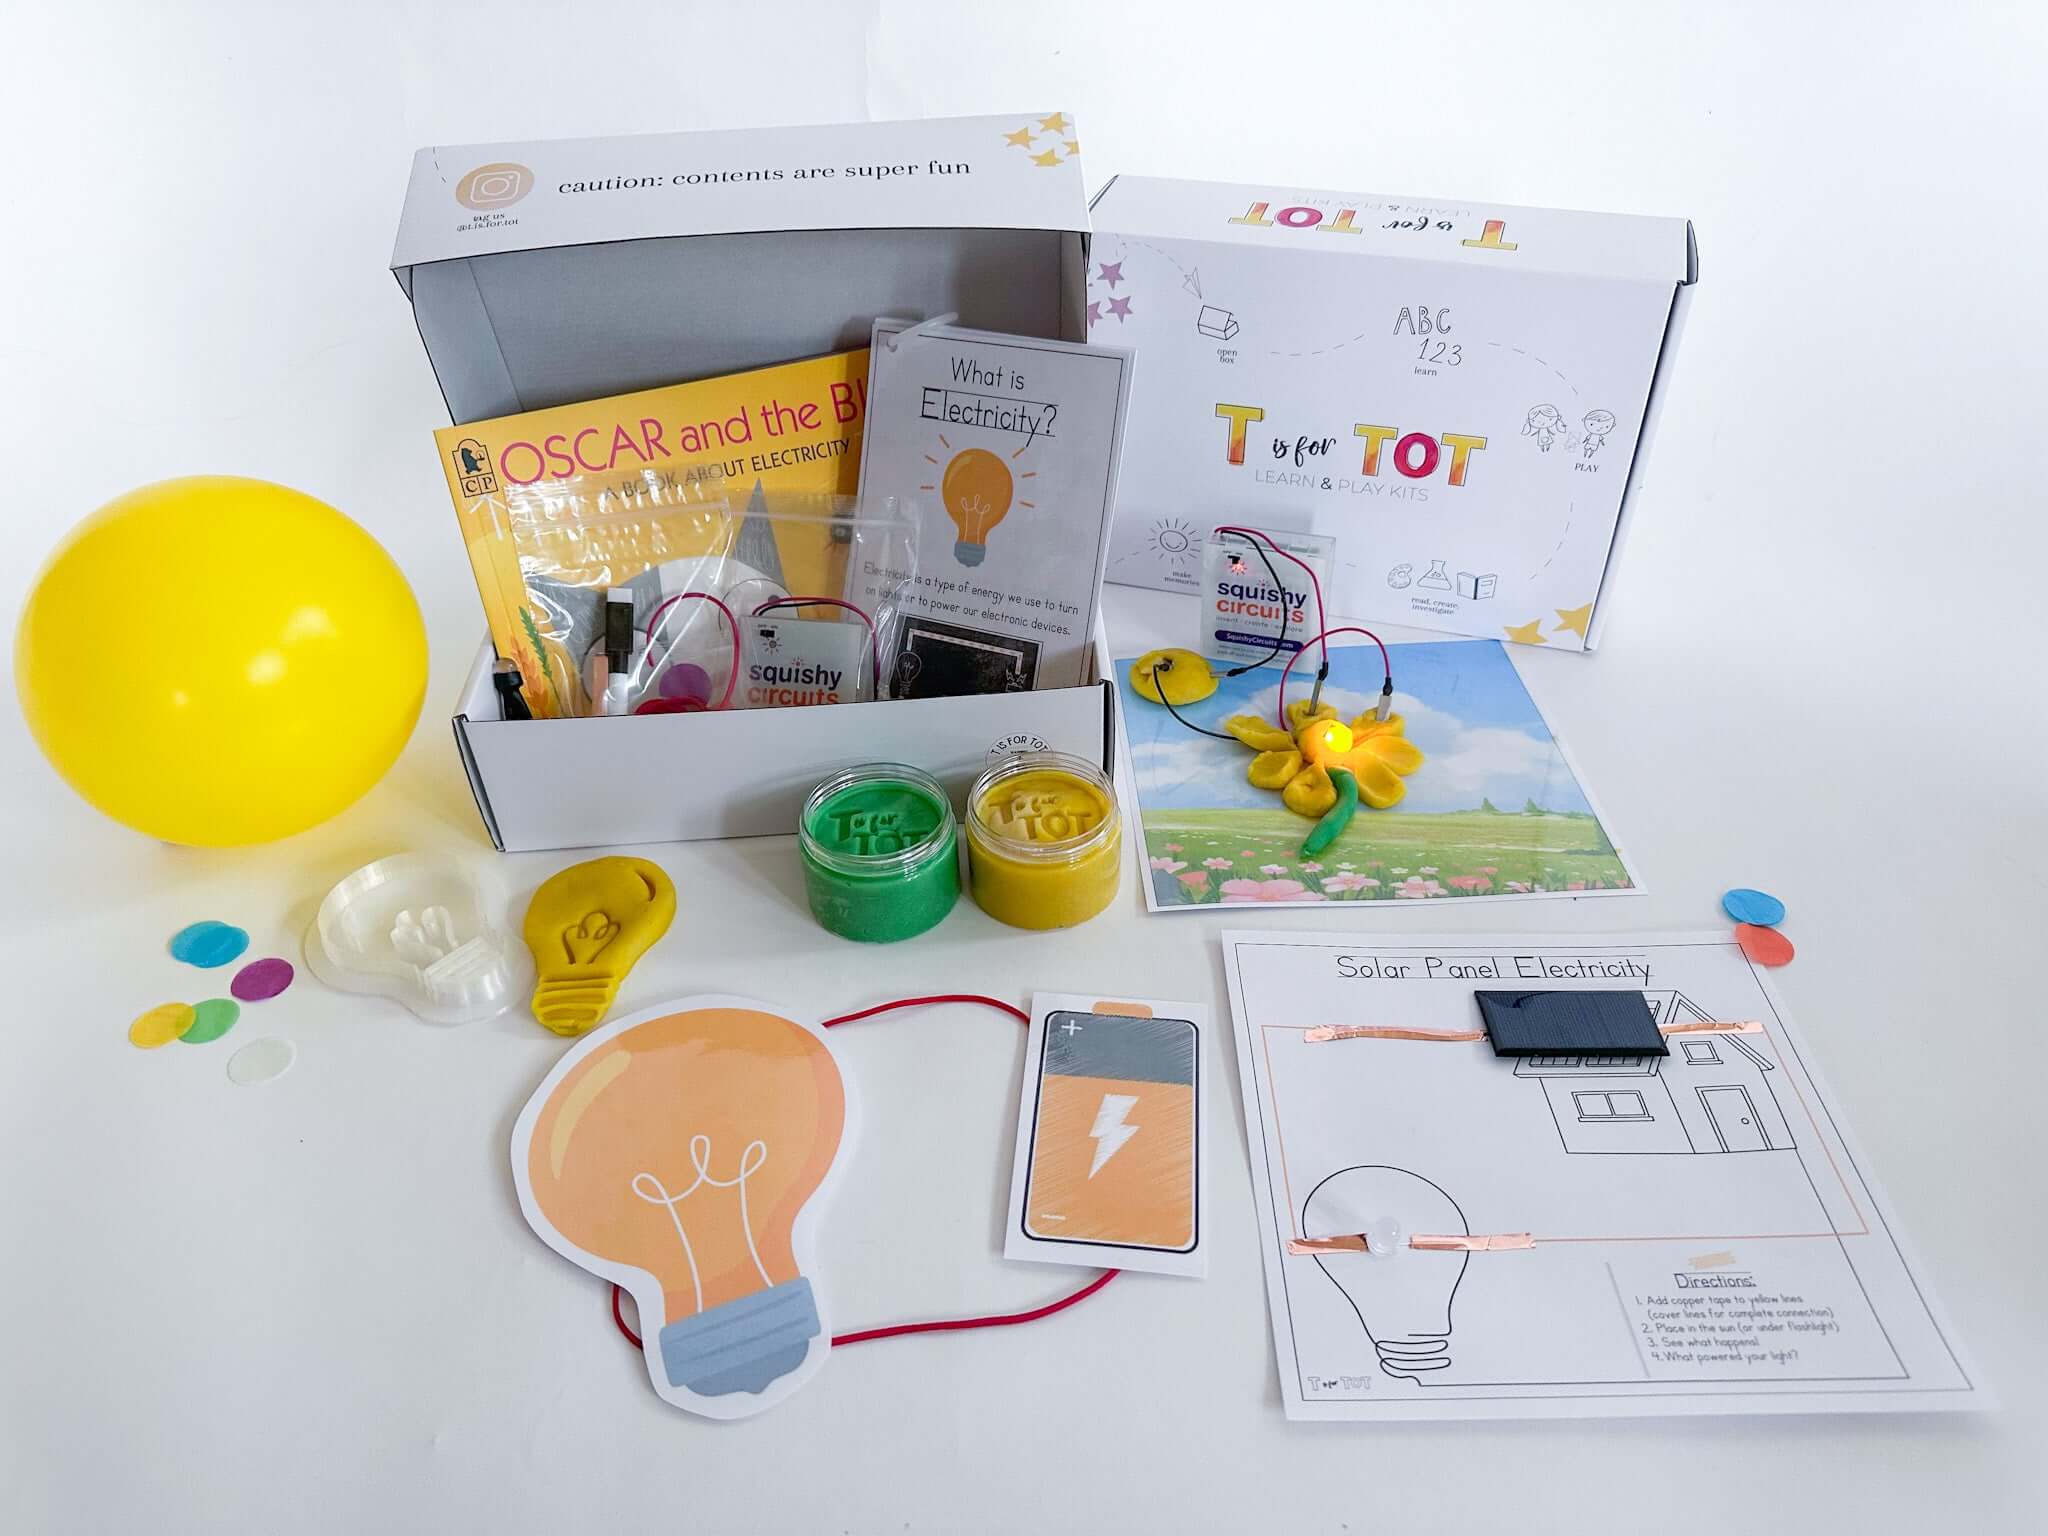 Electricity experiment kit for kids with Squishy Circuits battery pack and light. Comes with homemade playdough, lightbulb playdough cutter, and experiments to understand static and solar electricity. Includes 